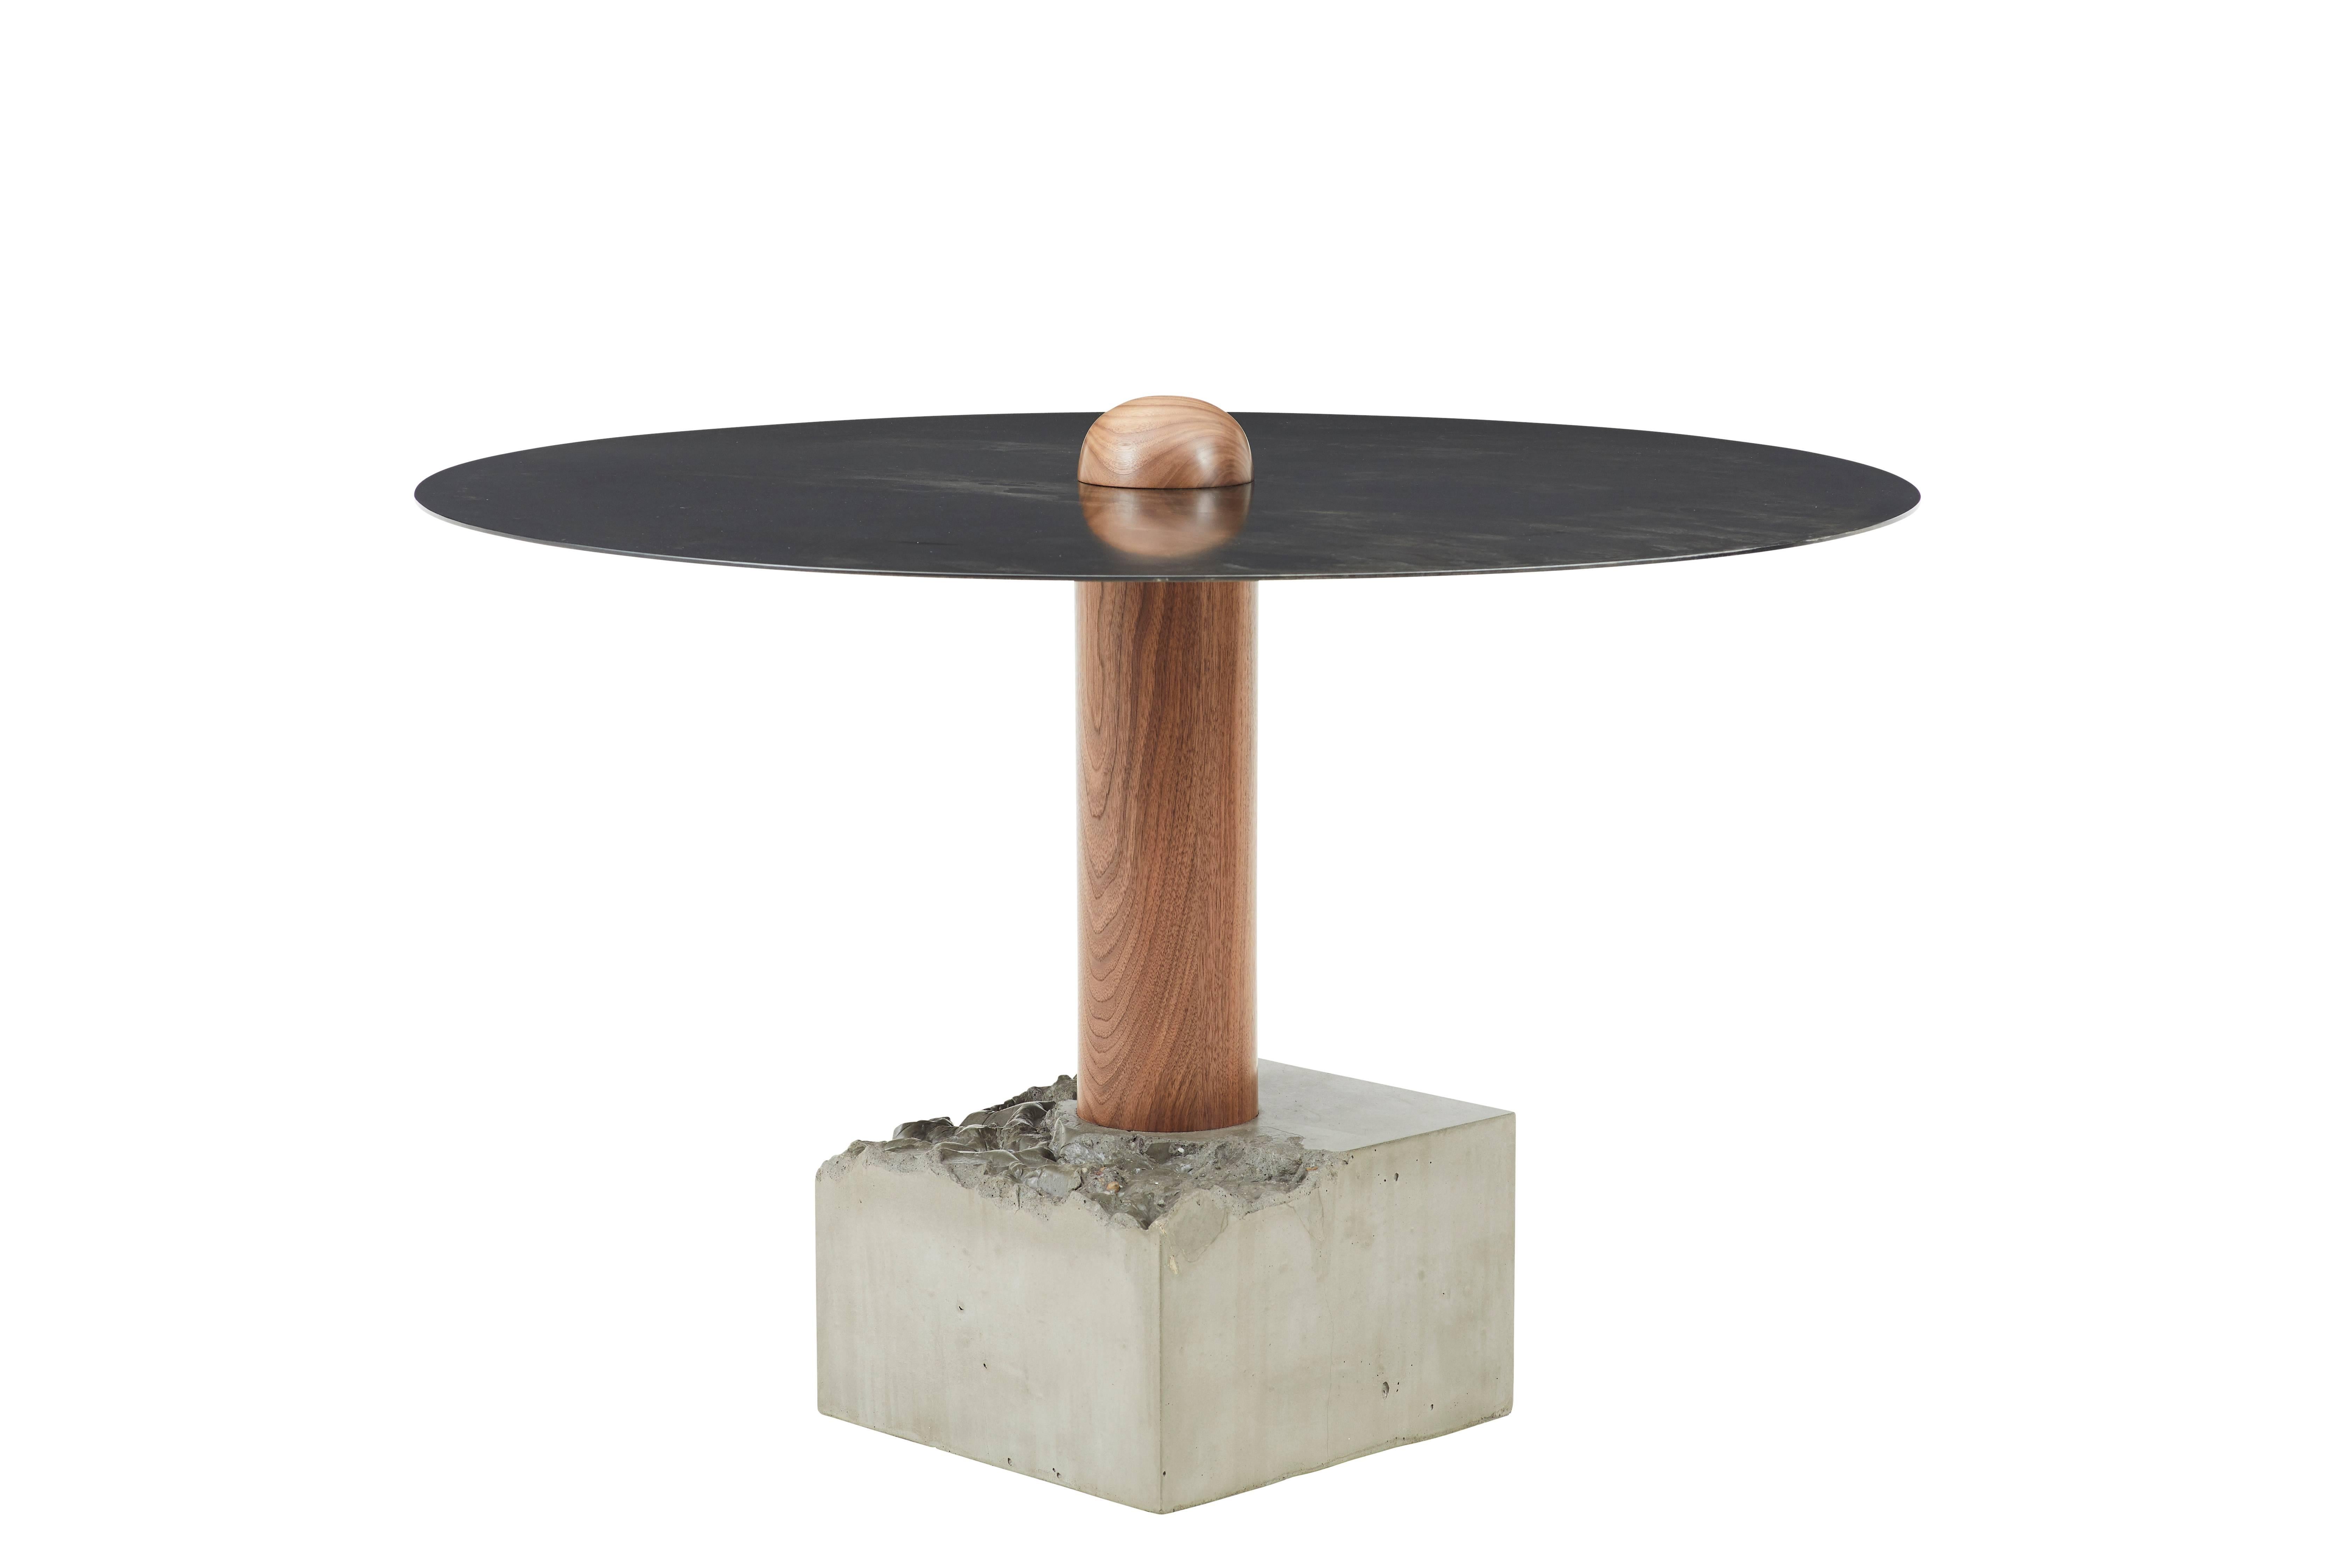 This round dining table is made of steel, solid walnut wood and cast-concrete. the base is cast to resemble a 